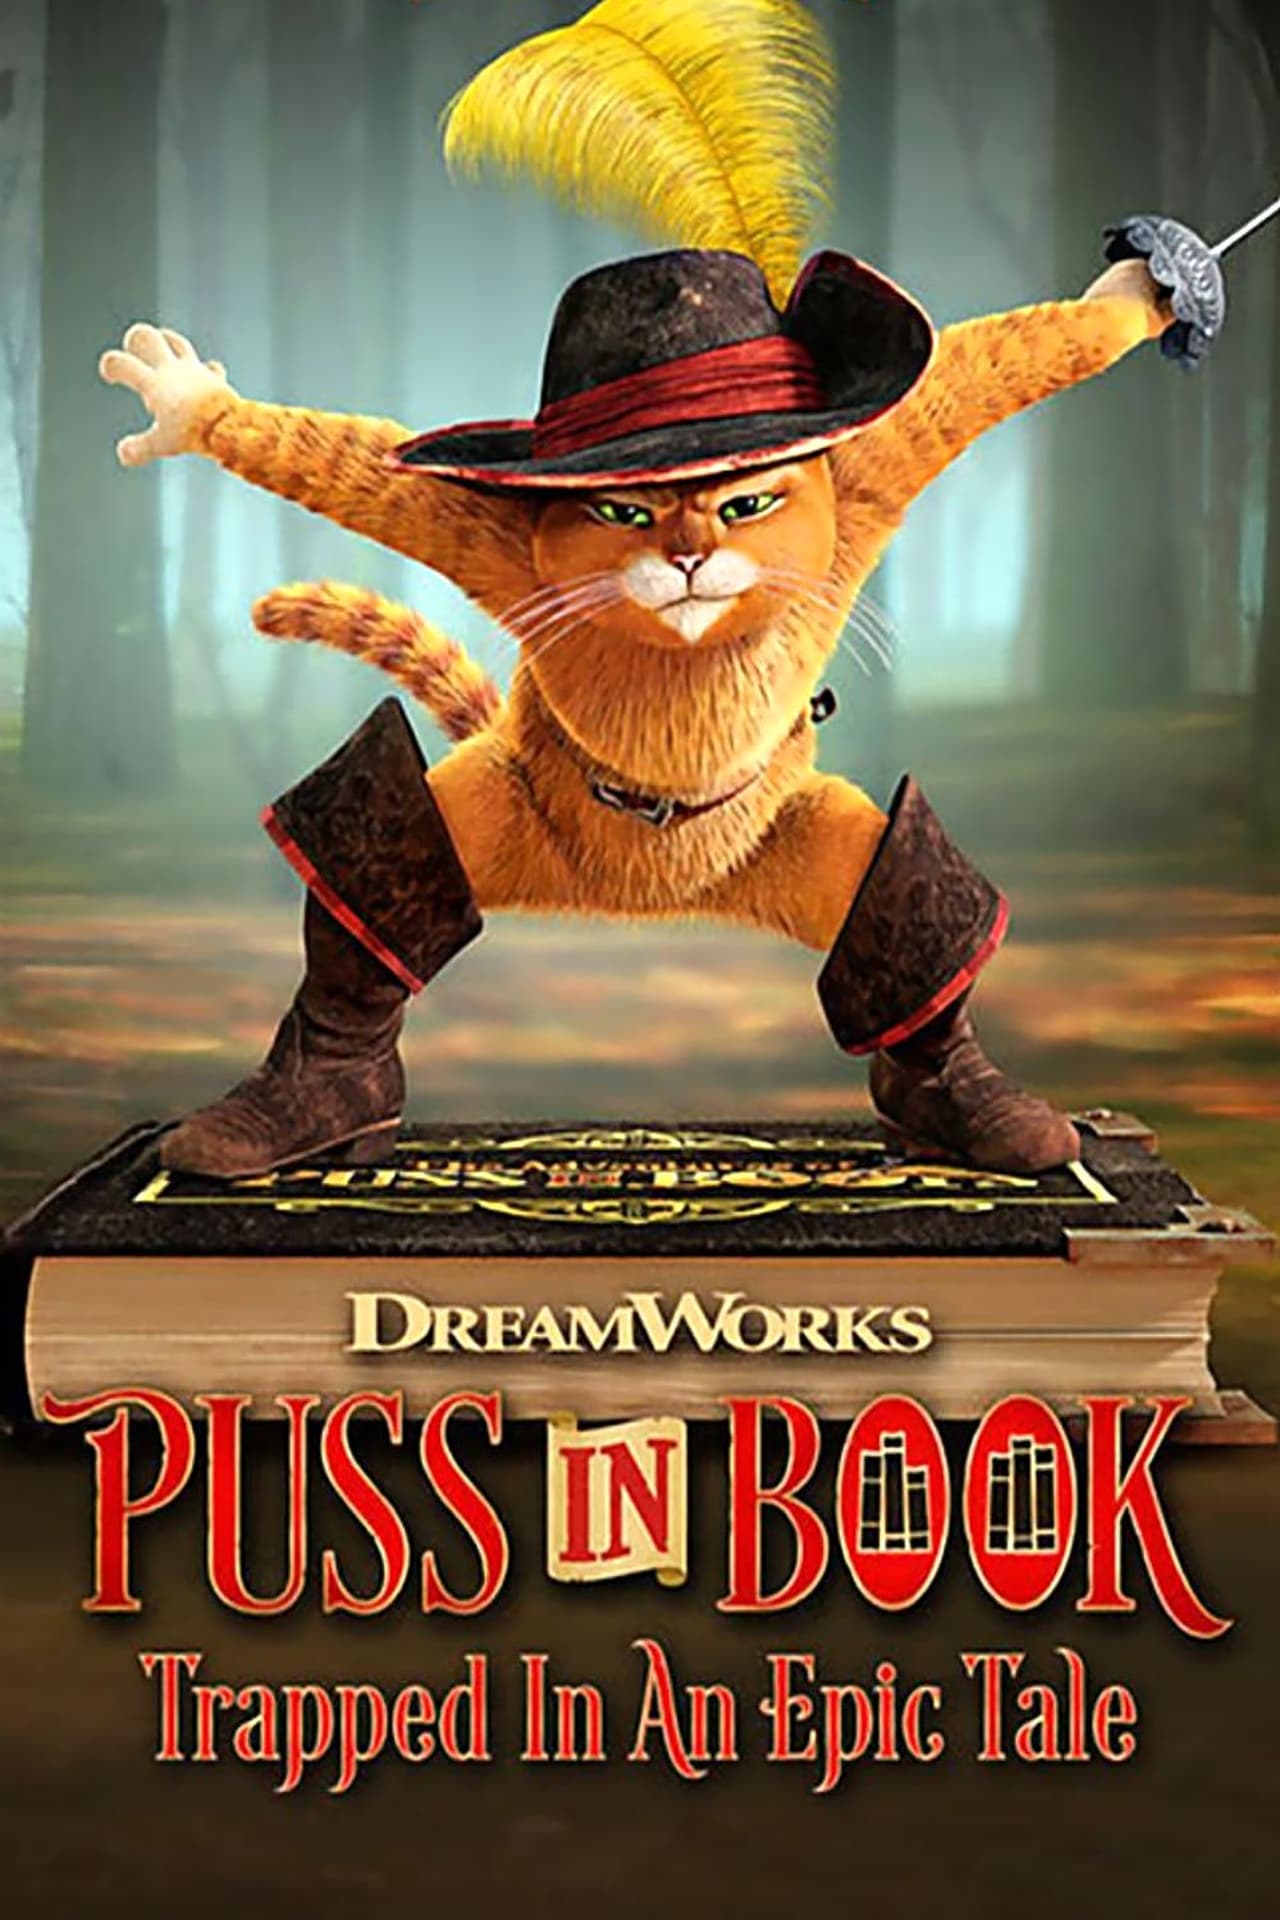 Puss in Book: Trapped in an Epic Tale (2017) 640Kbps 23.976Fps 48Khz 5.1Ch DD+ NF E-AC3 Turkish Audio TAC